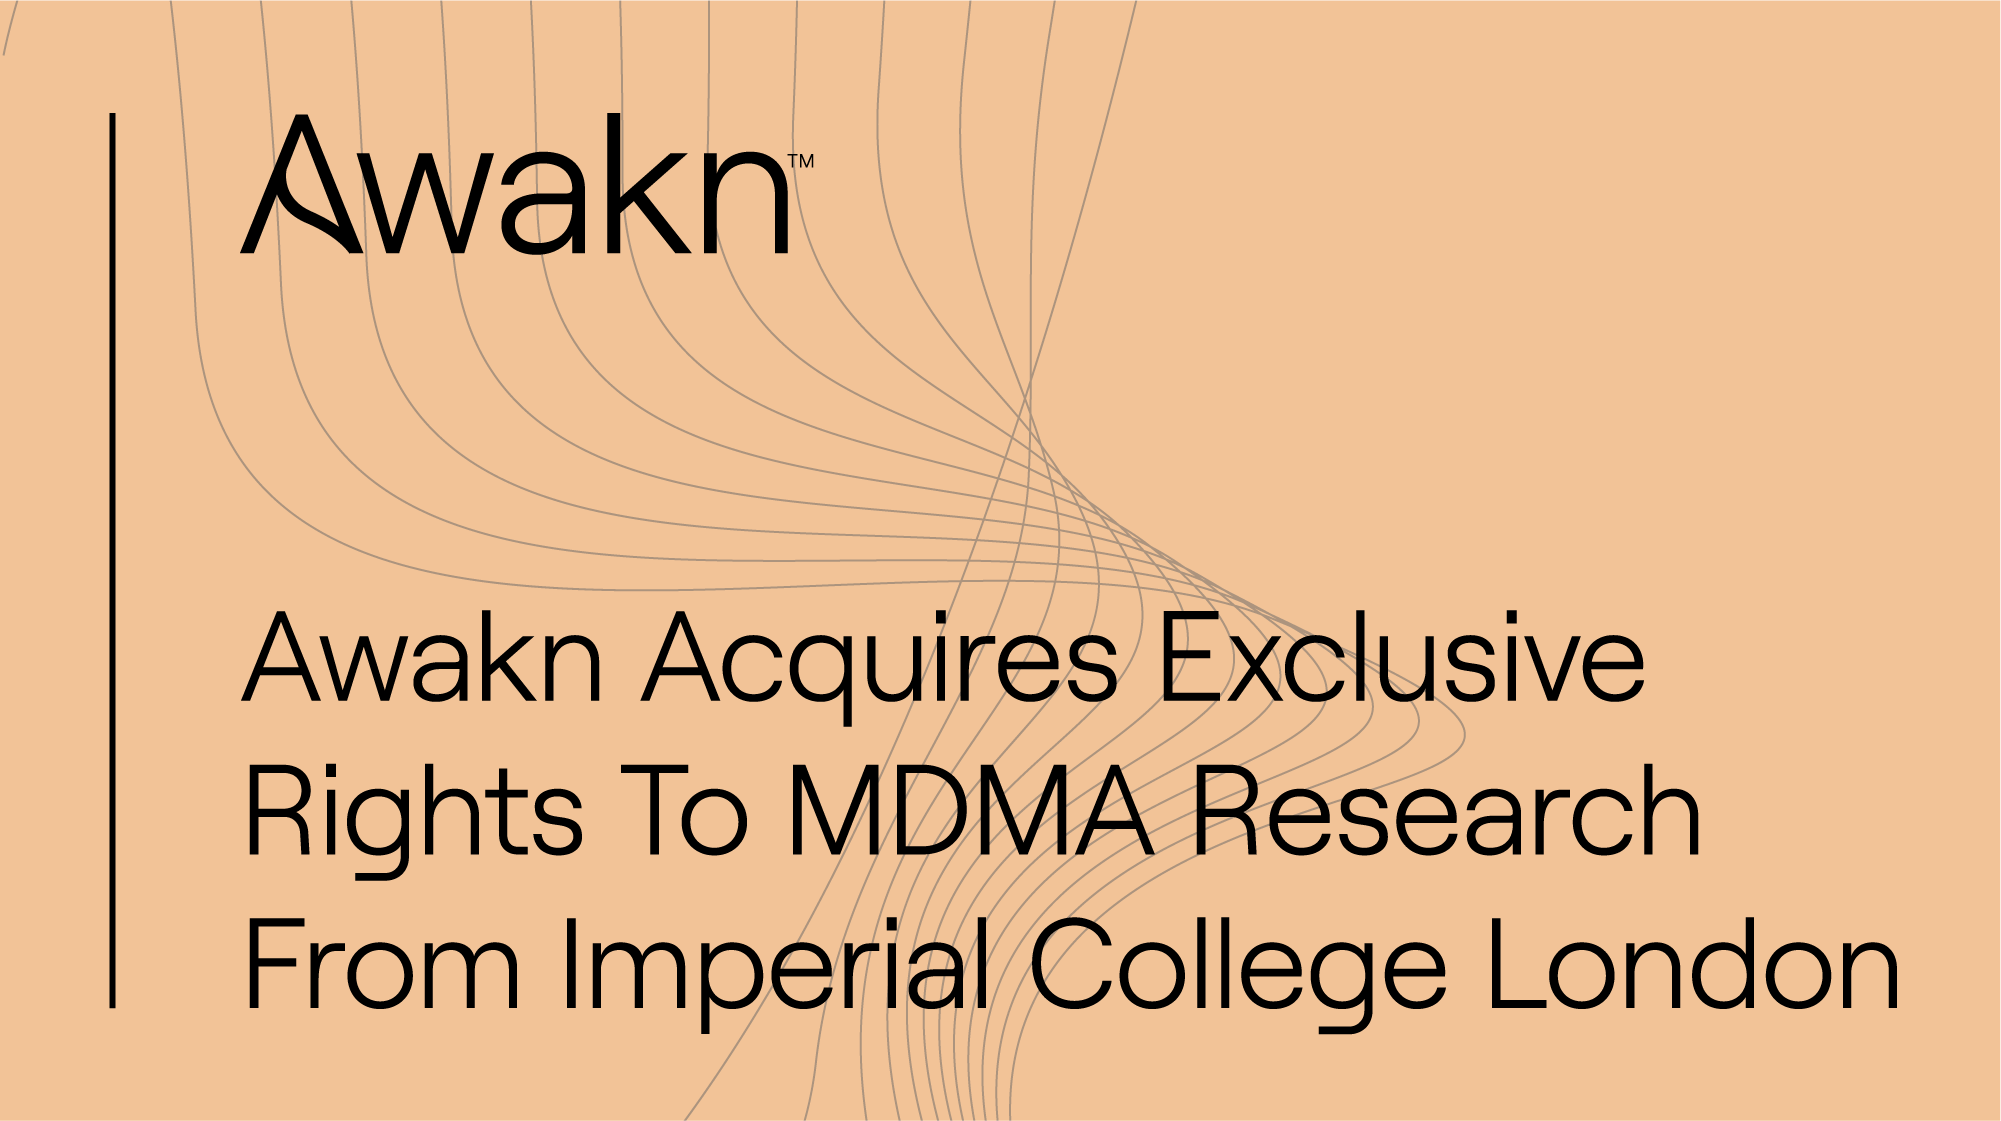 Awakn Life Sciences acquires Exclusive Rights To Mdma Research From Imperial College London